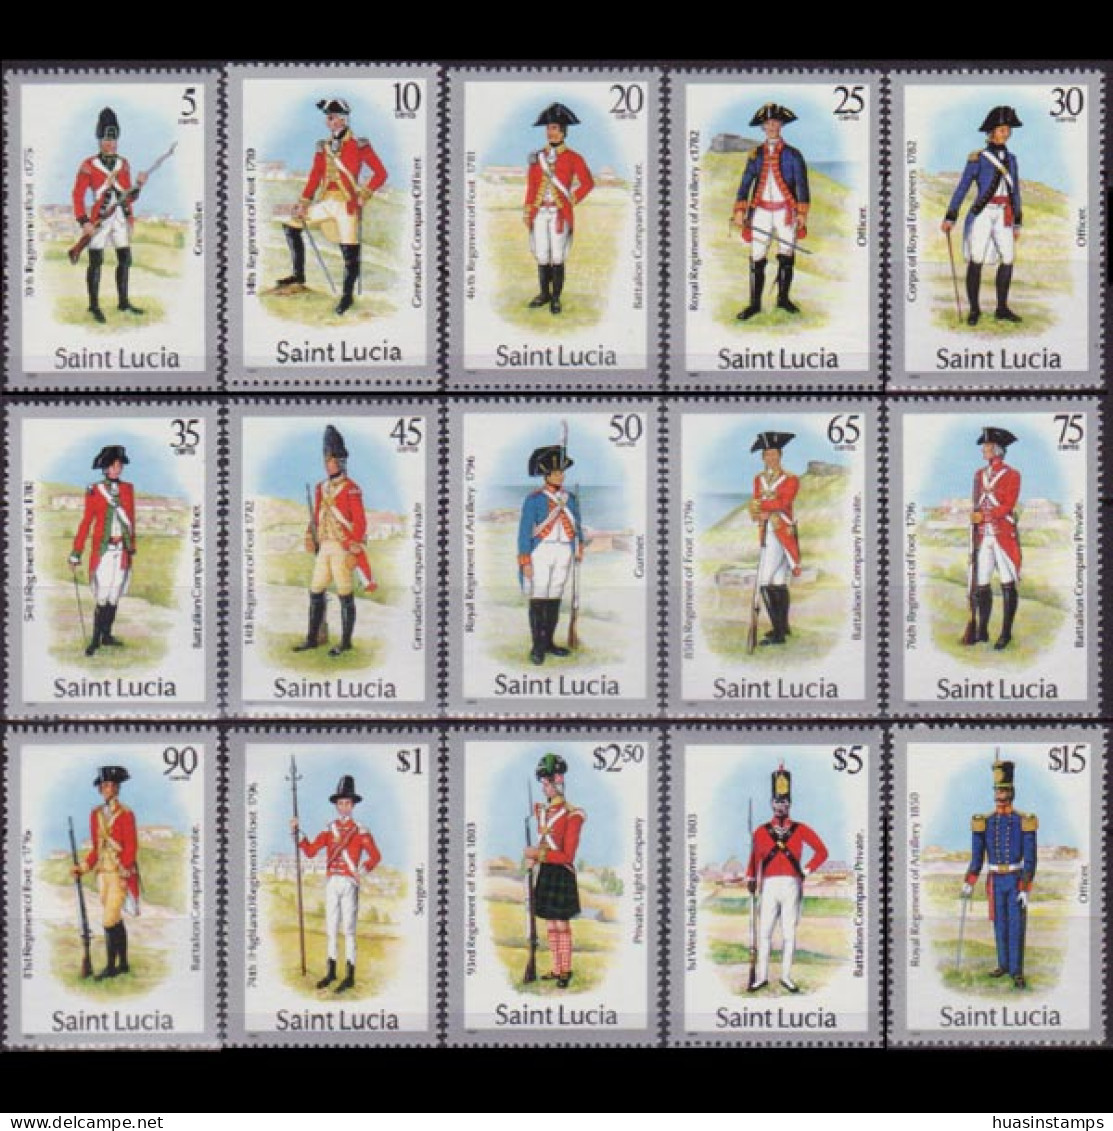 ST.LUCIA 1985 - #747-61 Mil.Uniform Dated 1984 Set Of 15 MNH - St.Lucia (1979-...)